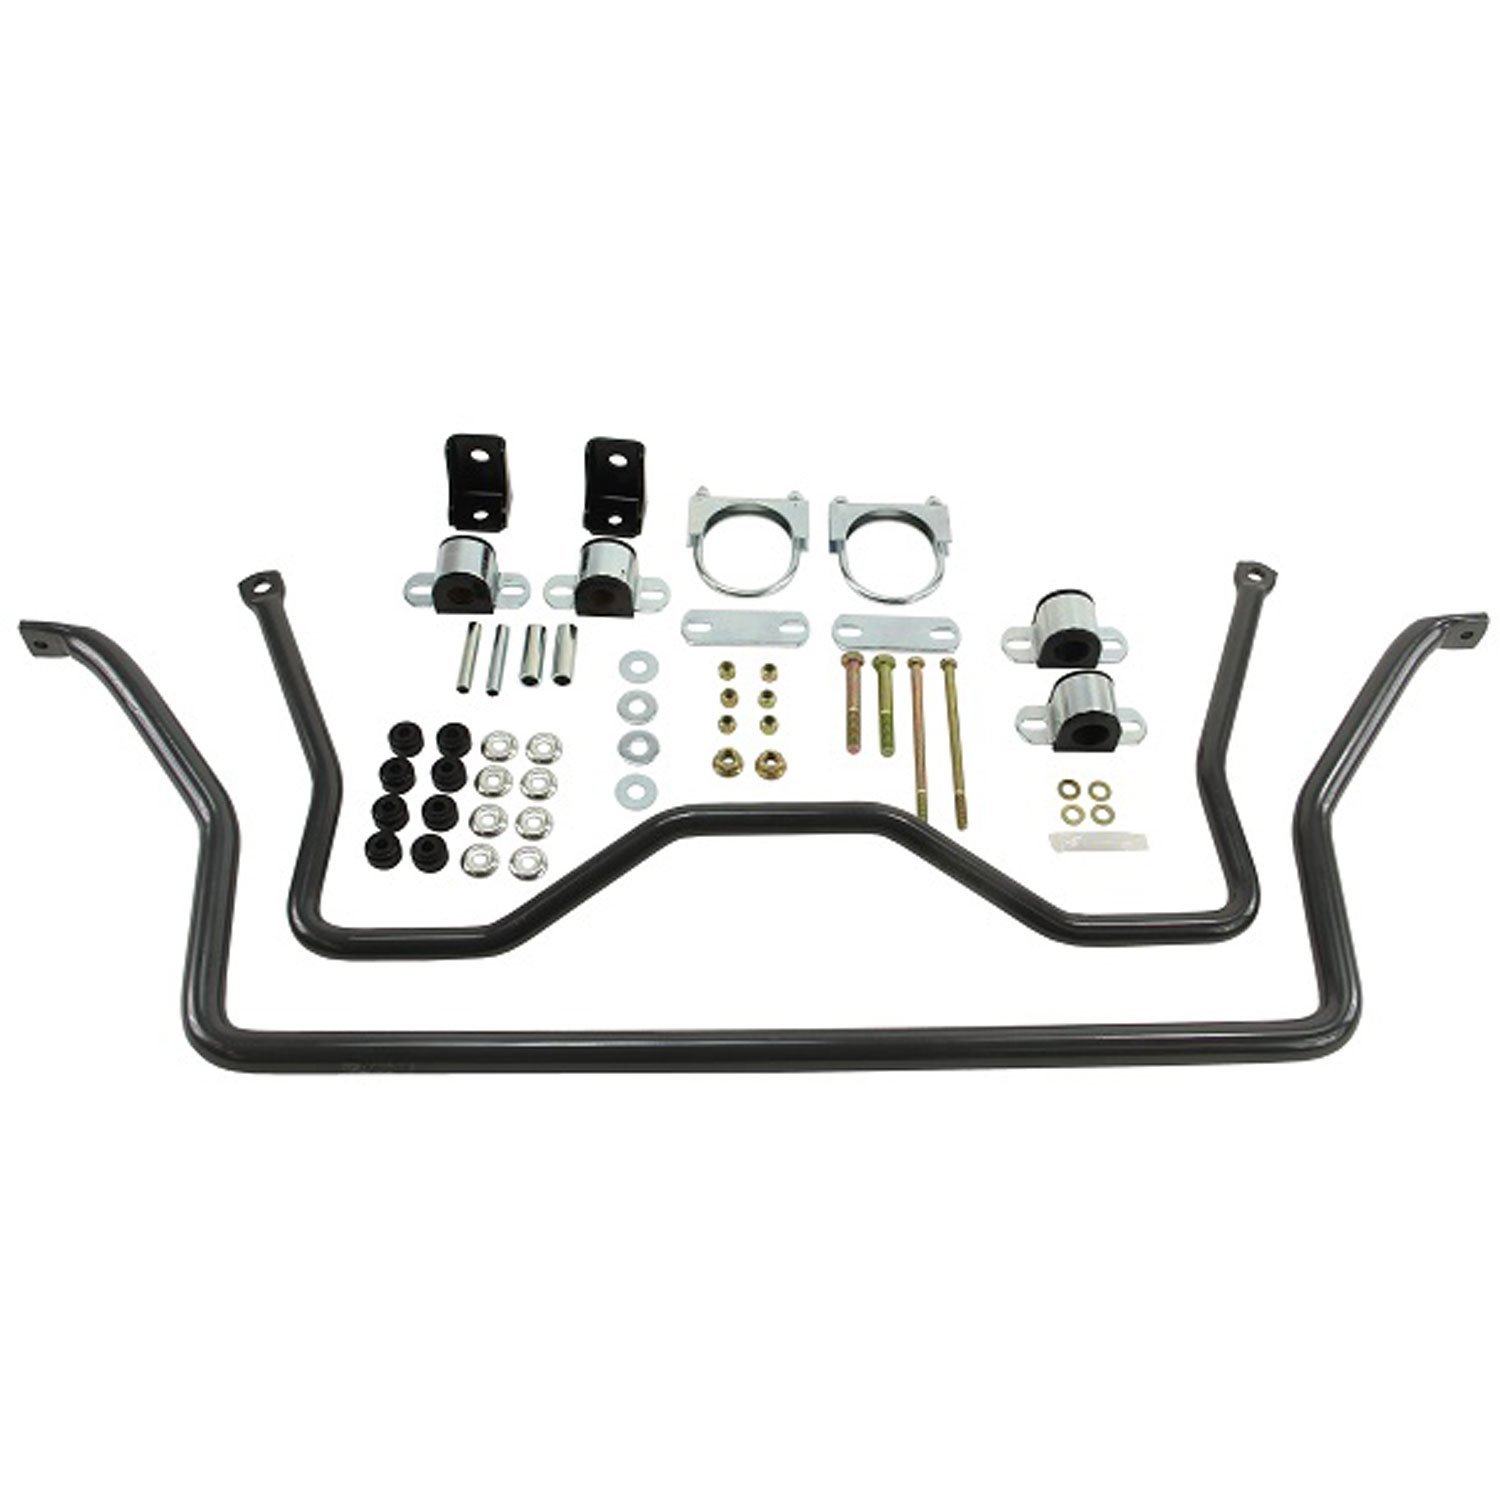 Front/Rear Sway Bar Kit for 2004-2012 Chevy Colorado/GMC